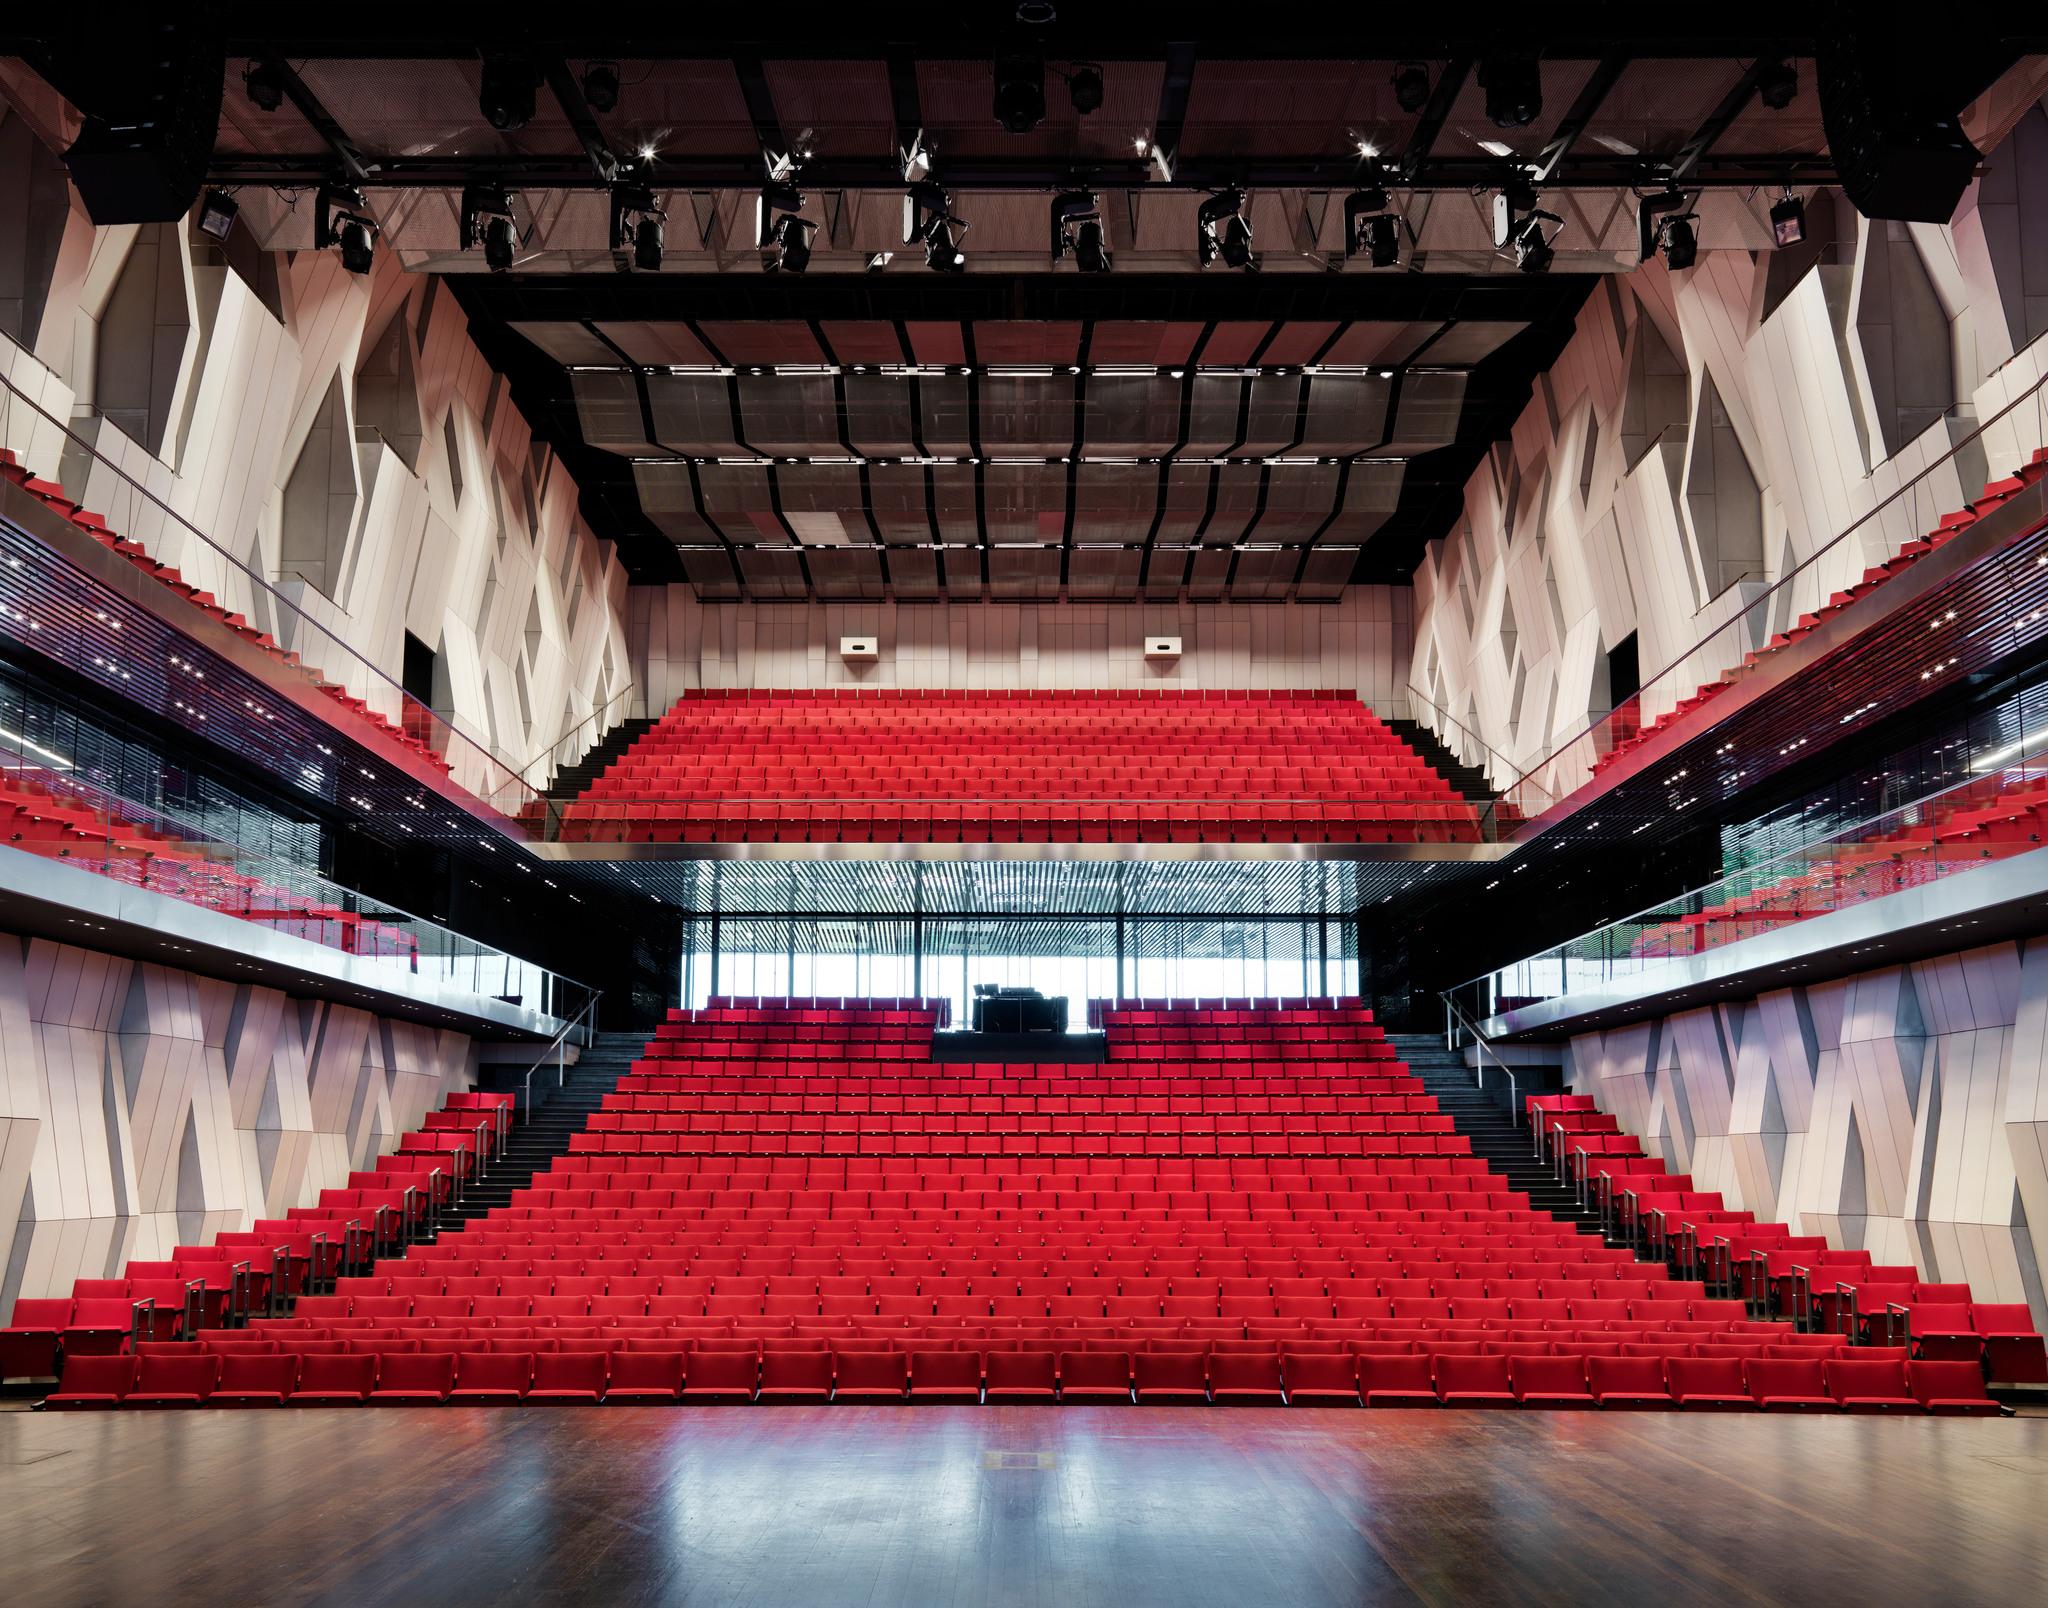 The interior of a concert hall, with red seats.